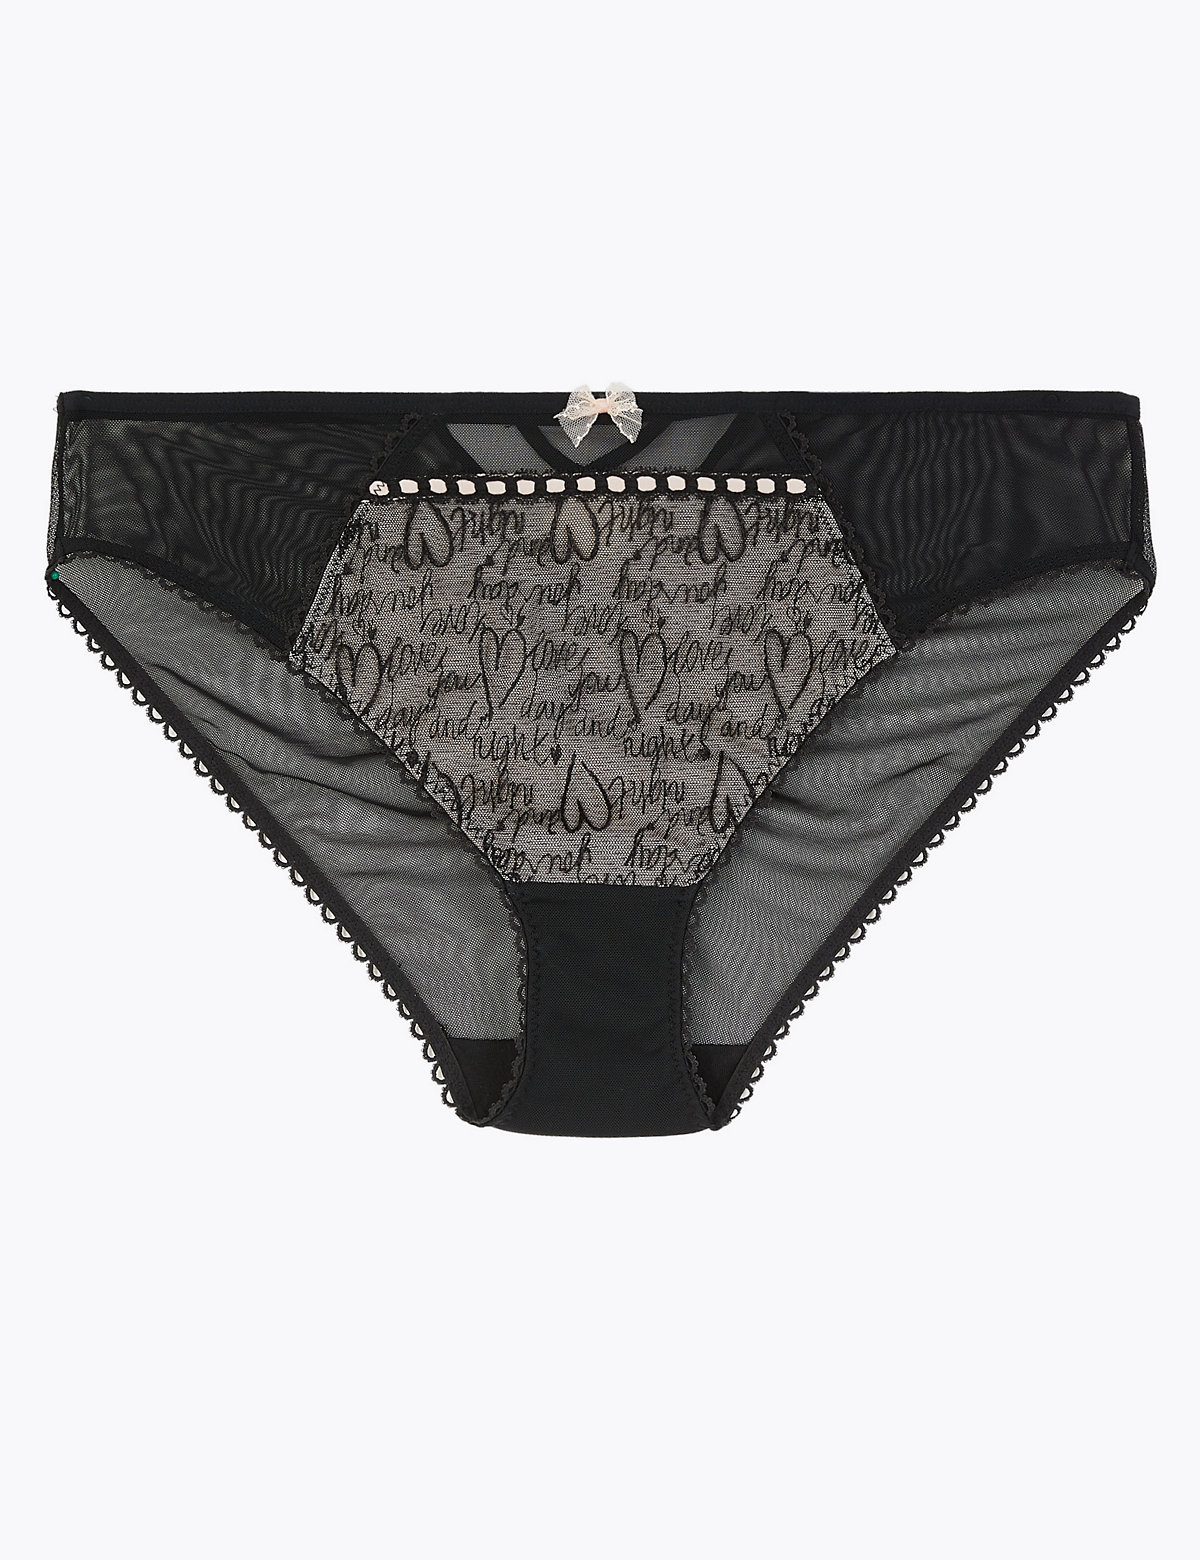 Love Embroidered High Leg Knickers